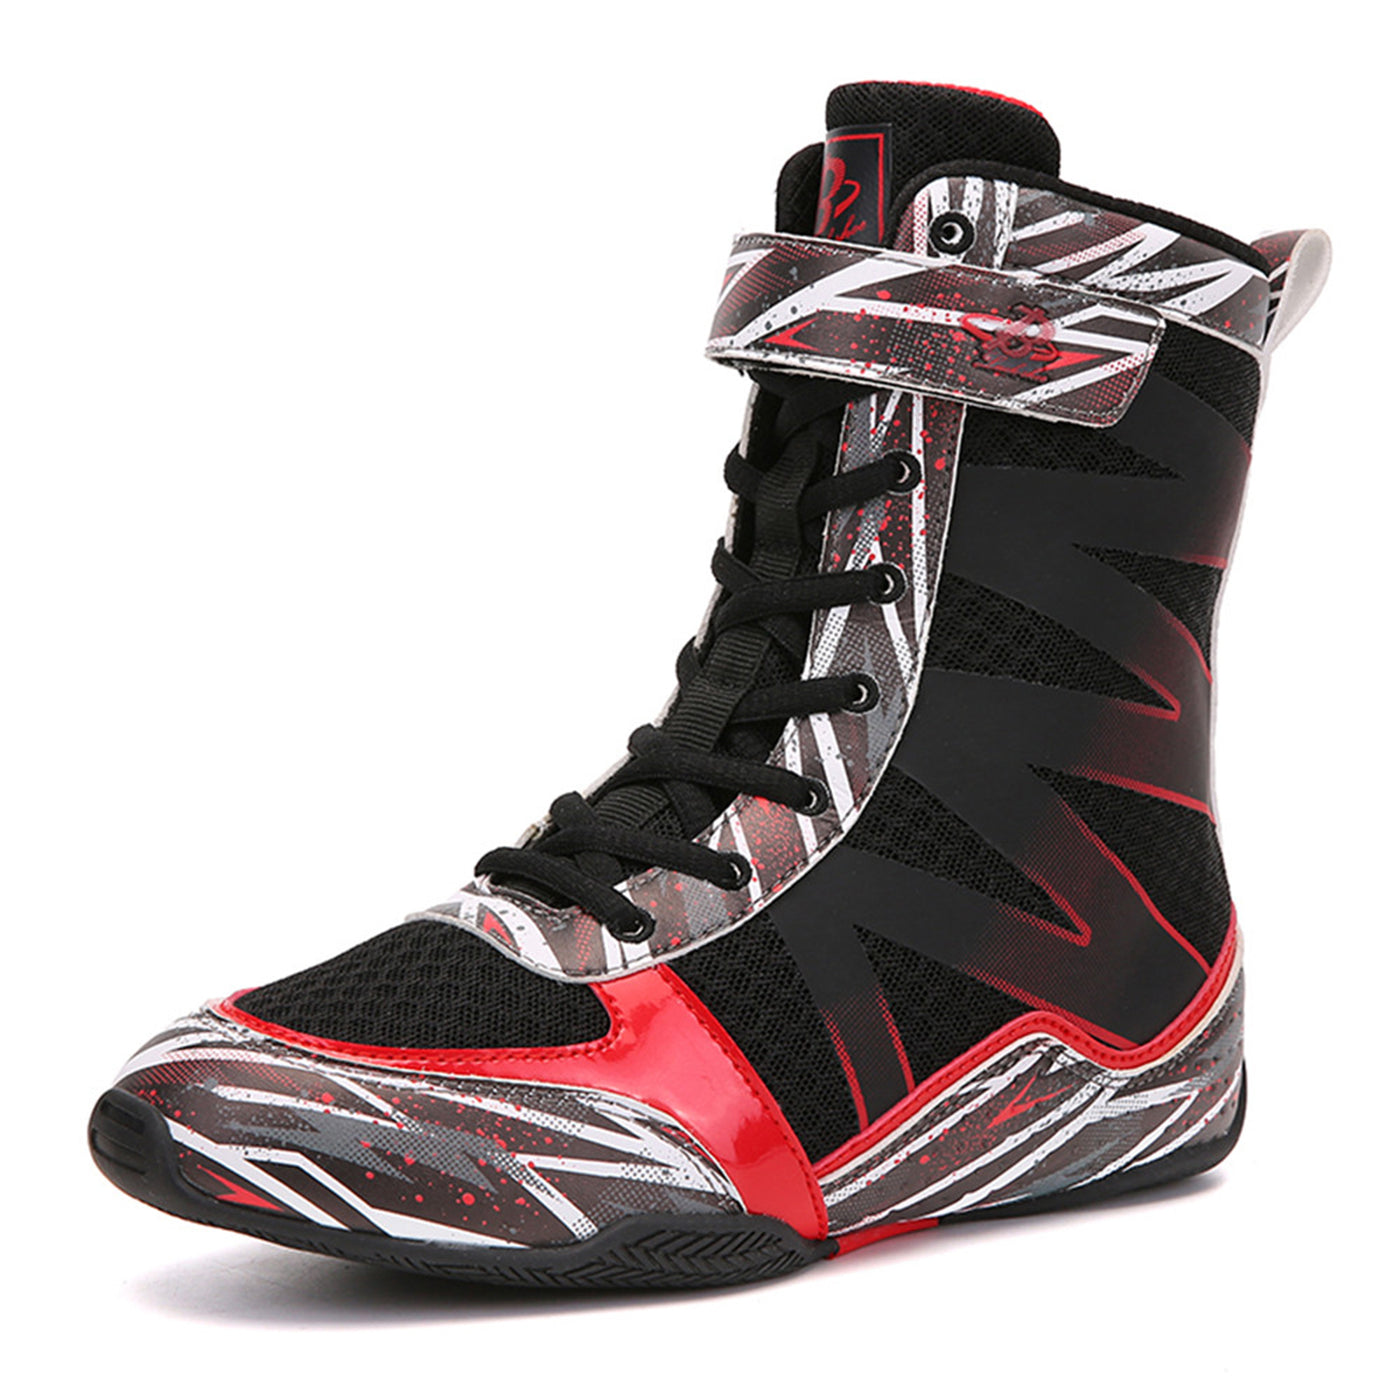 B LUCK SHOE Boxing Shoes for Kids, Youth Boxing Boots Hi-top Breathable Wrestling Shoes LS-218 BLACK